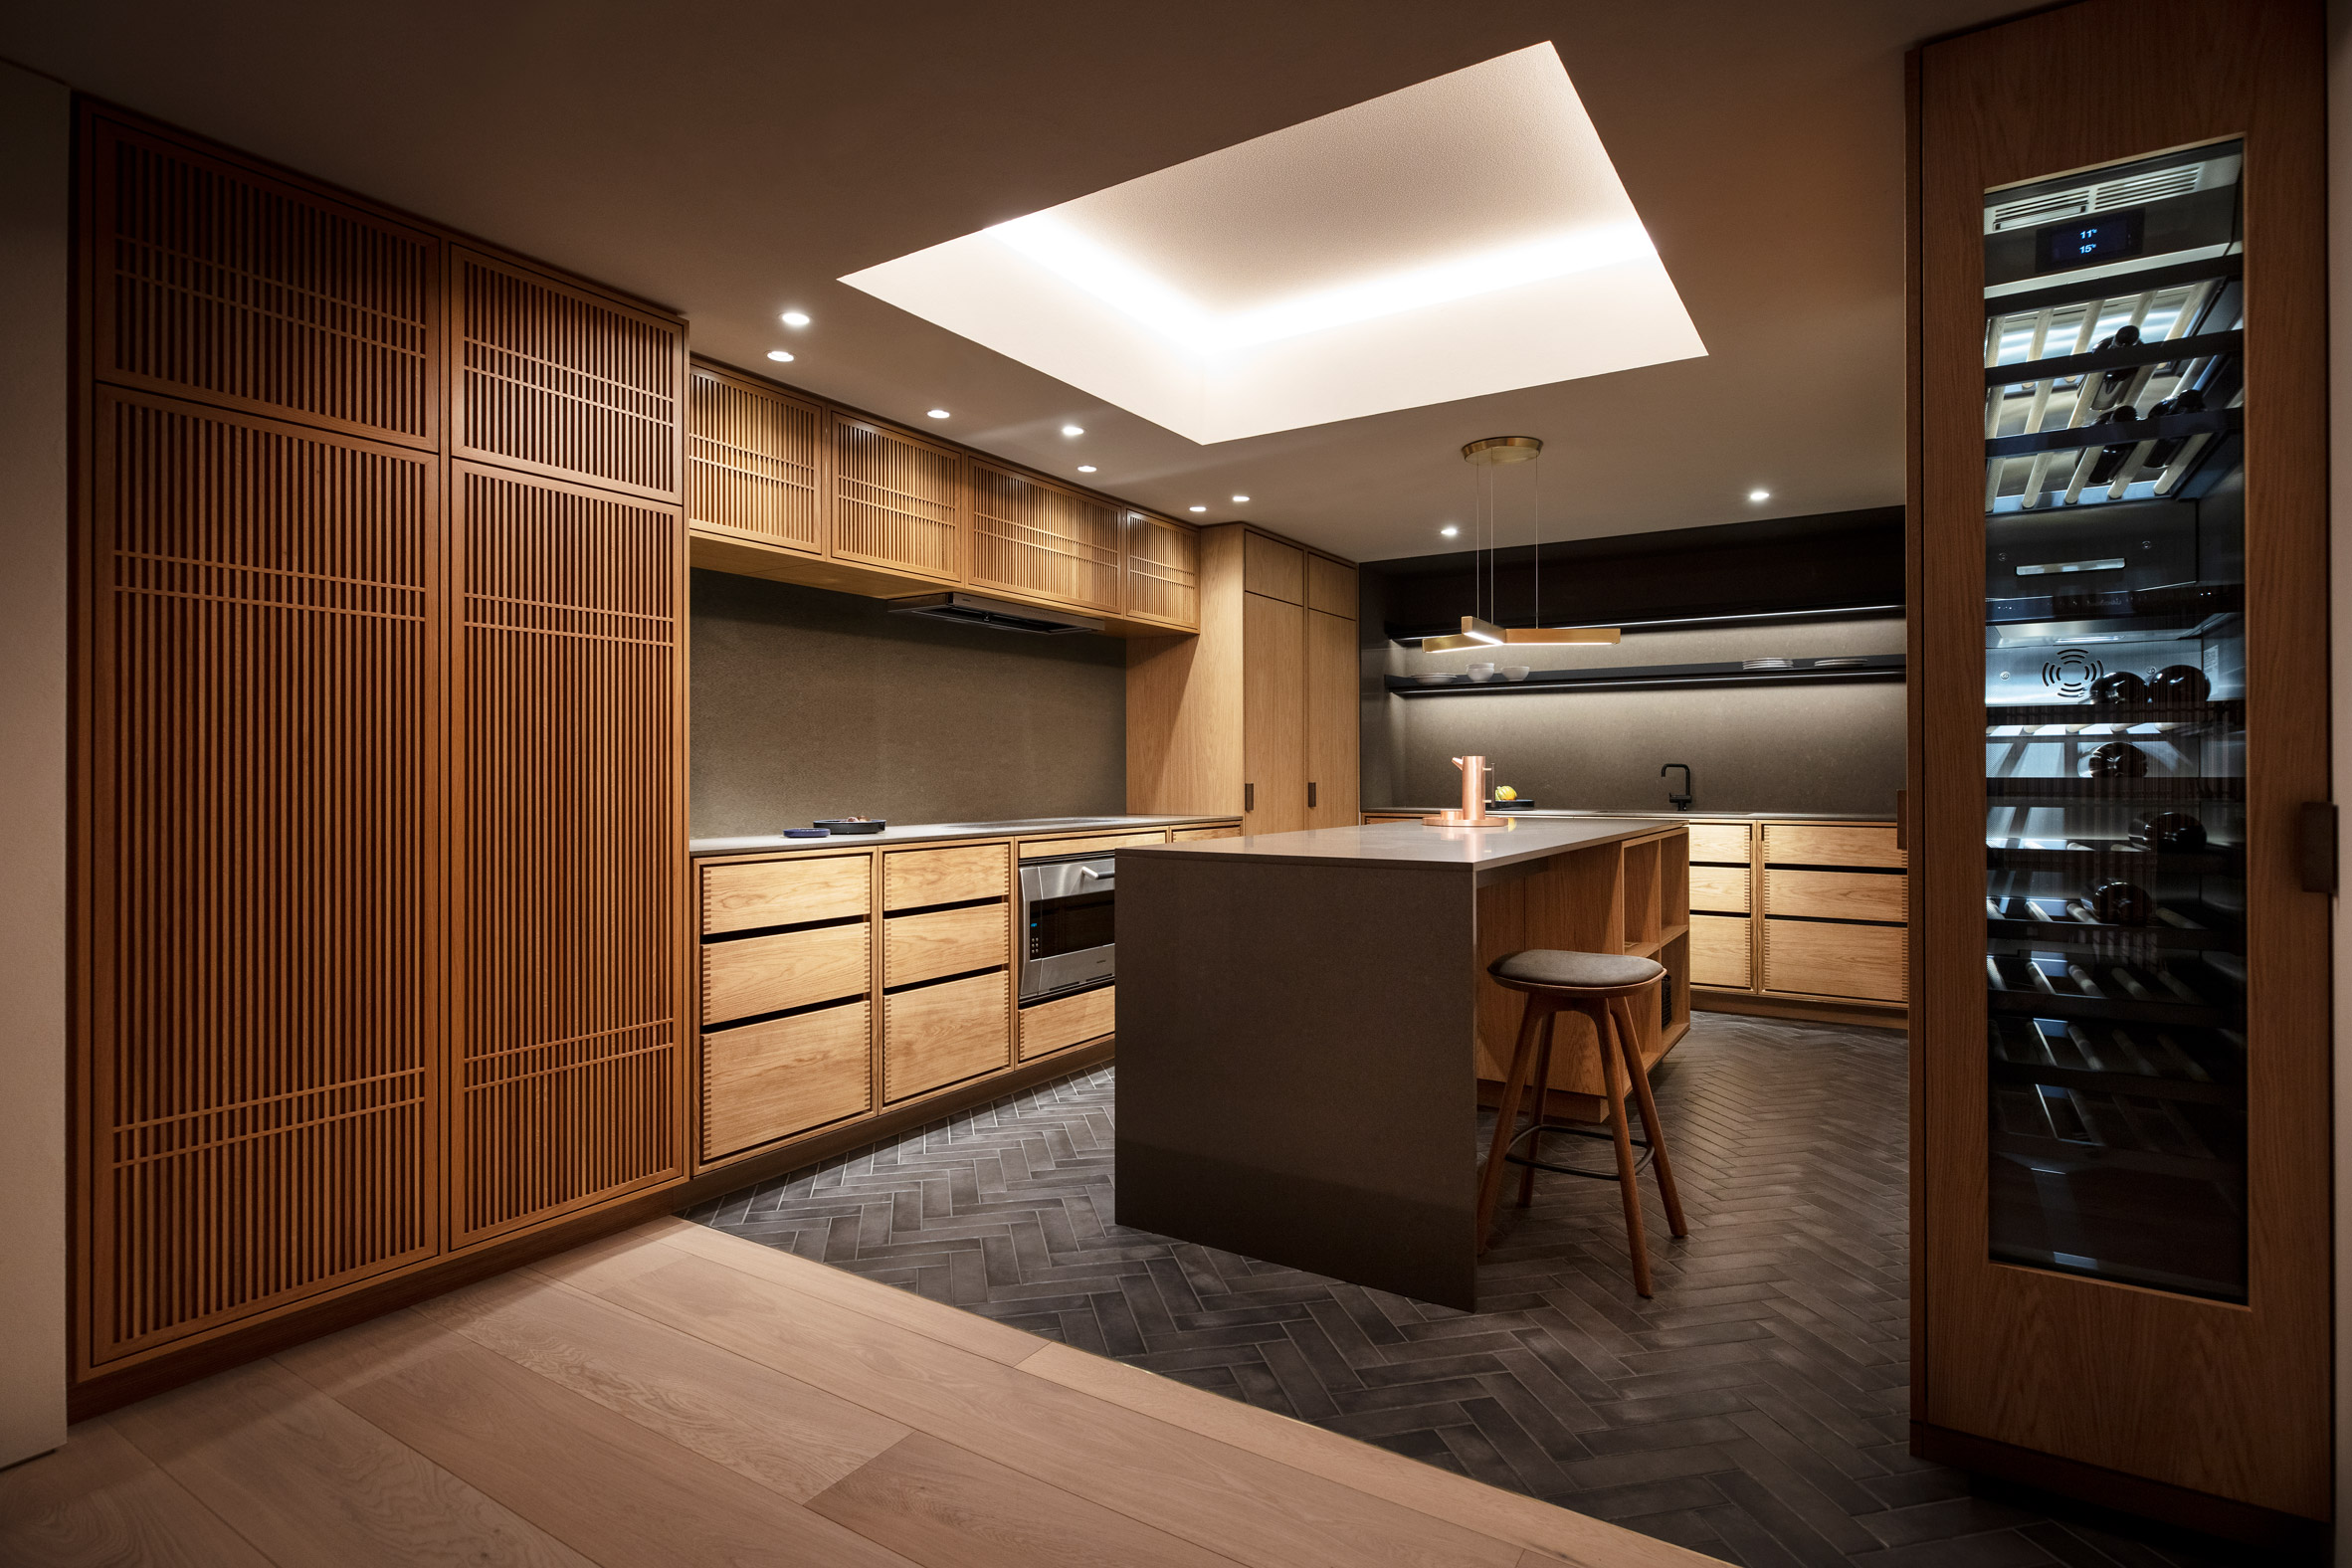 Wooden cabinetry